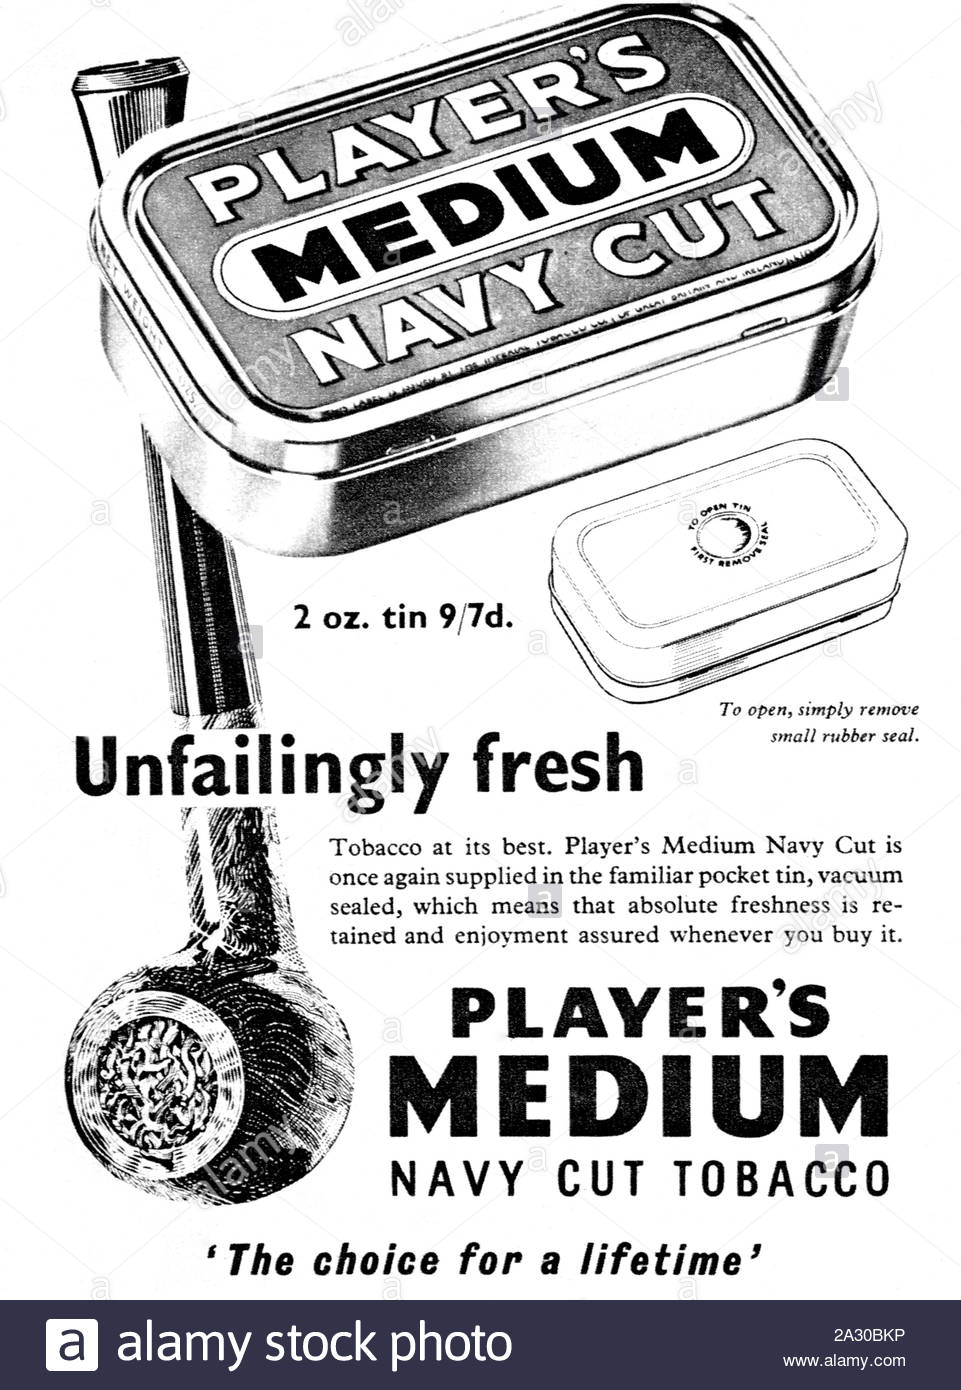 Player's medium Navy Cut tobacco, vintage advertising from 1955 Stock Photo